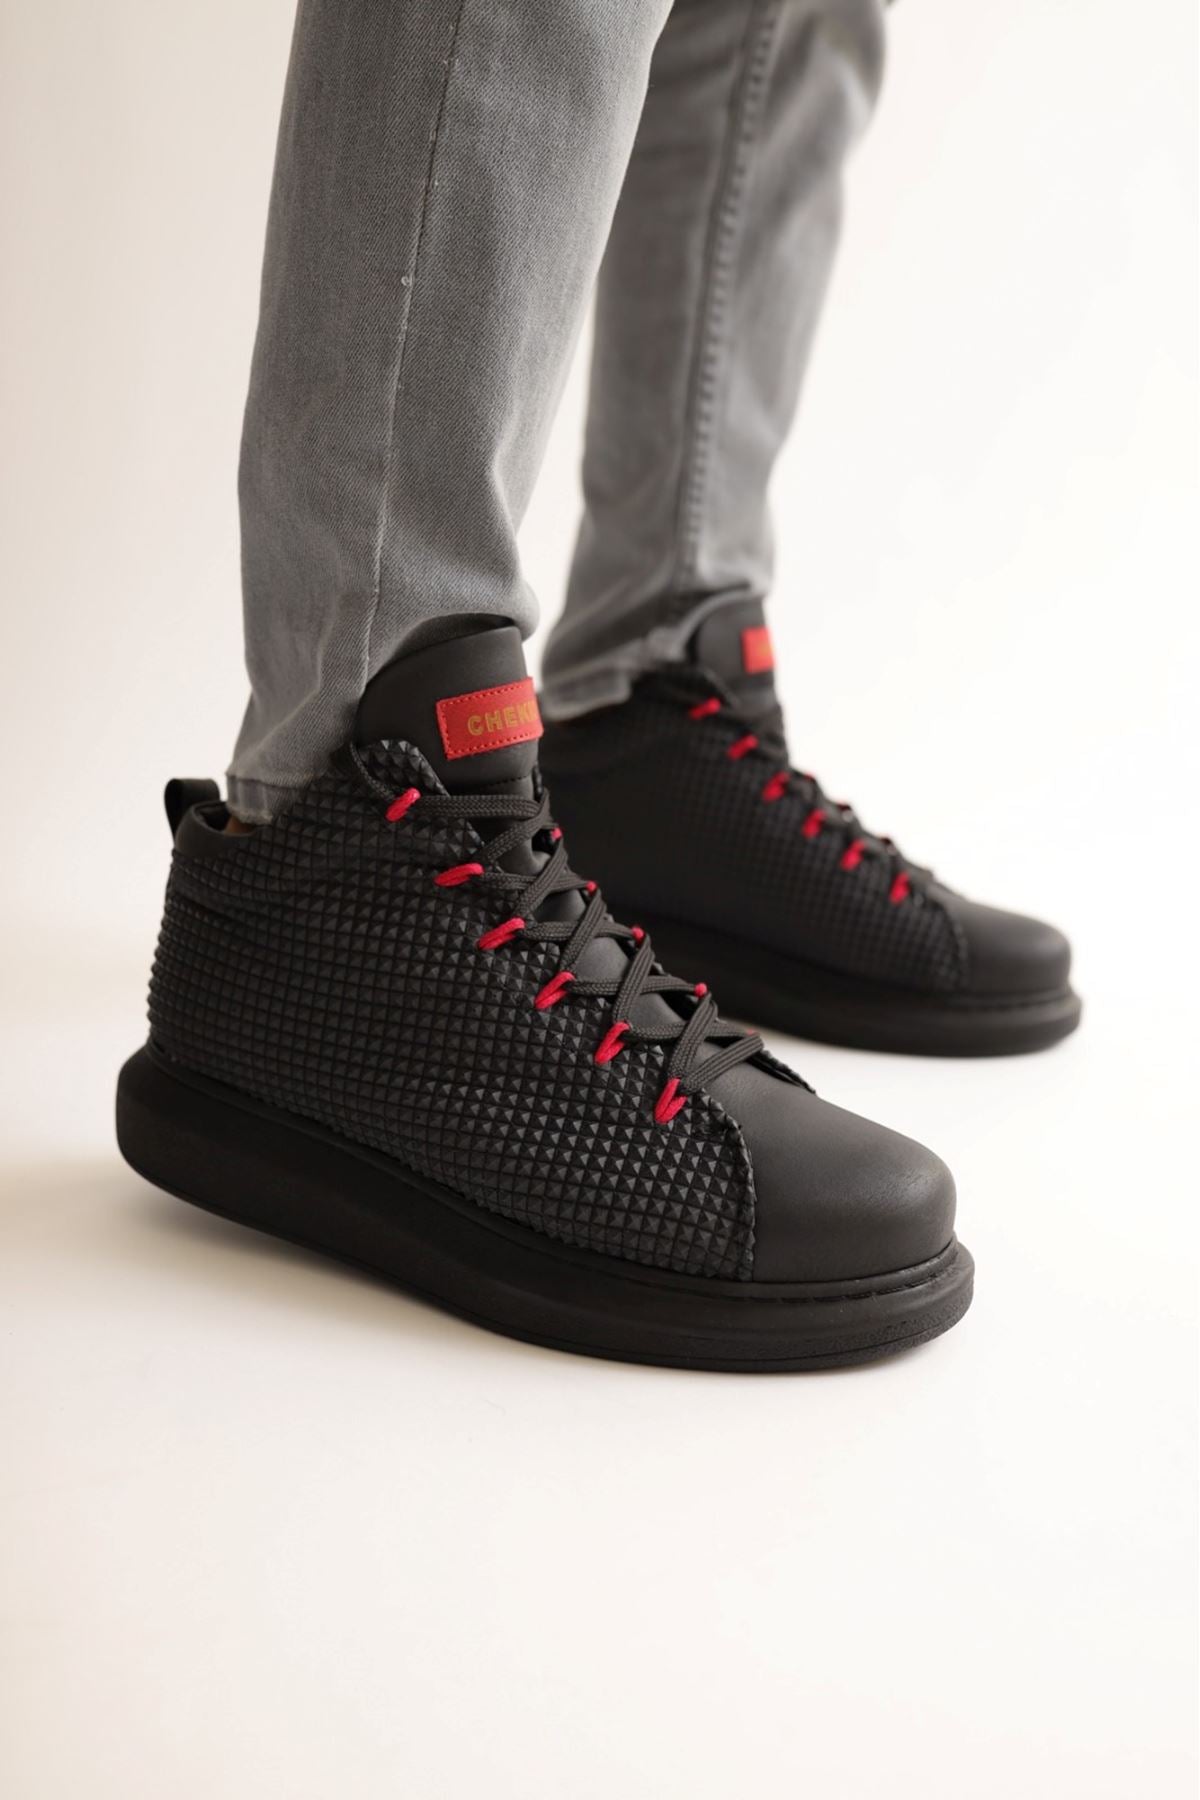 CH111 Garni ST BLACK/RED men's sneakers shoes - STREETMODE™